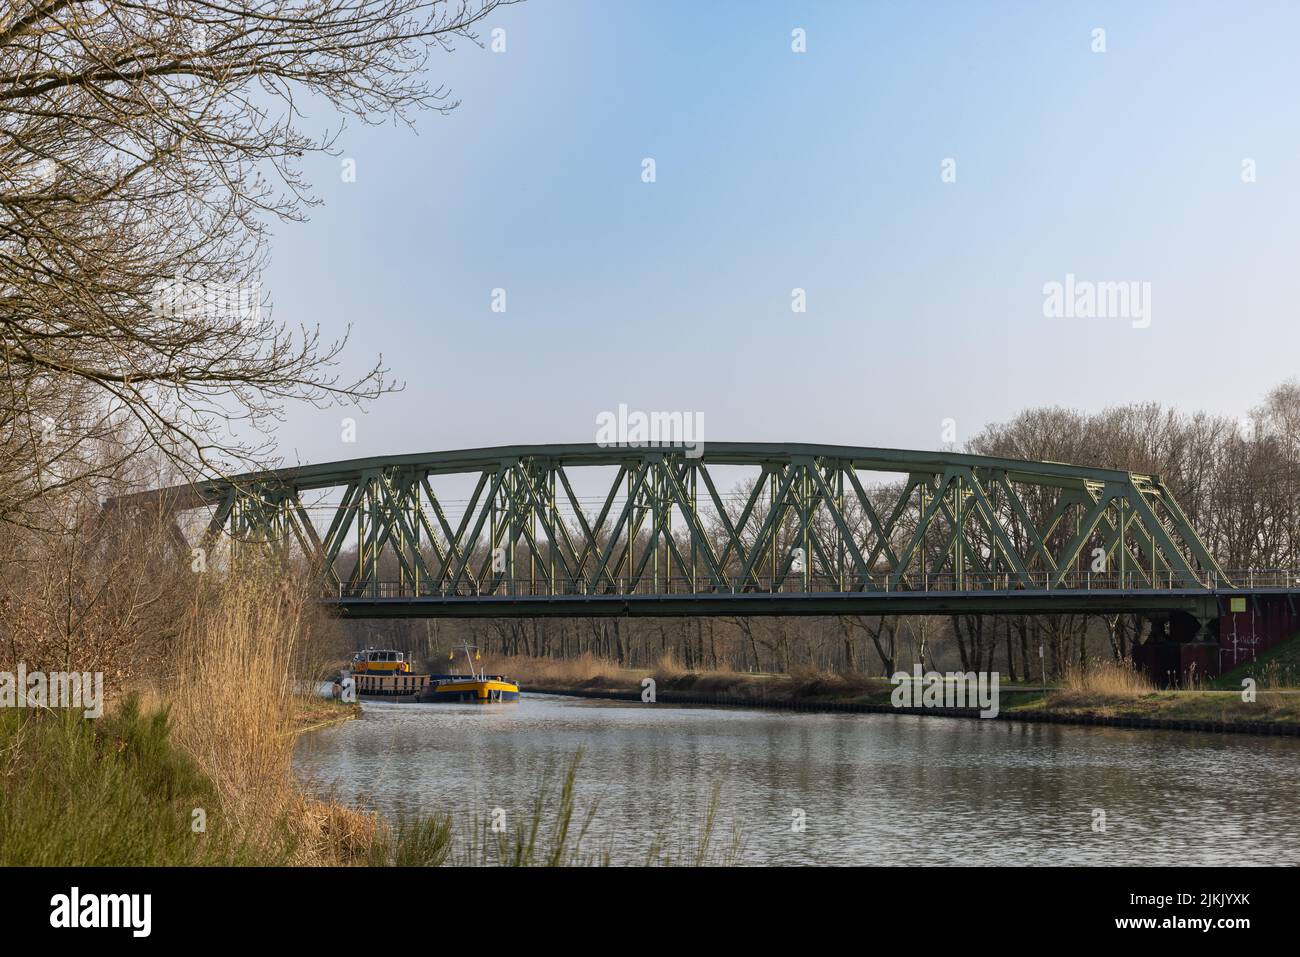 A train bridge over a river in the Netherlands with a canal boat in the background Stock Photo